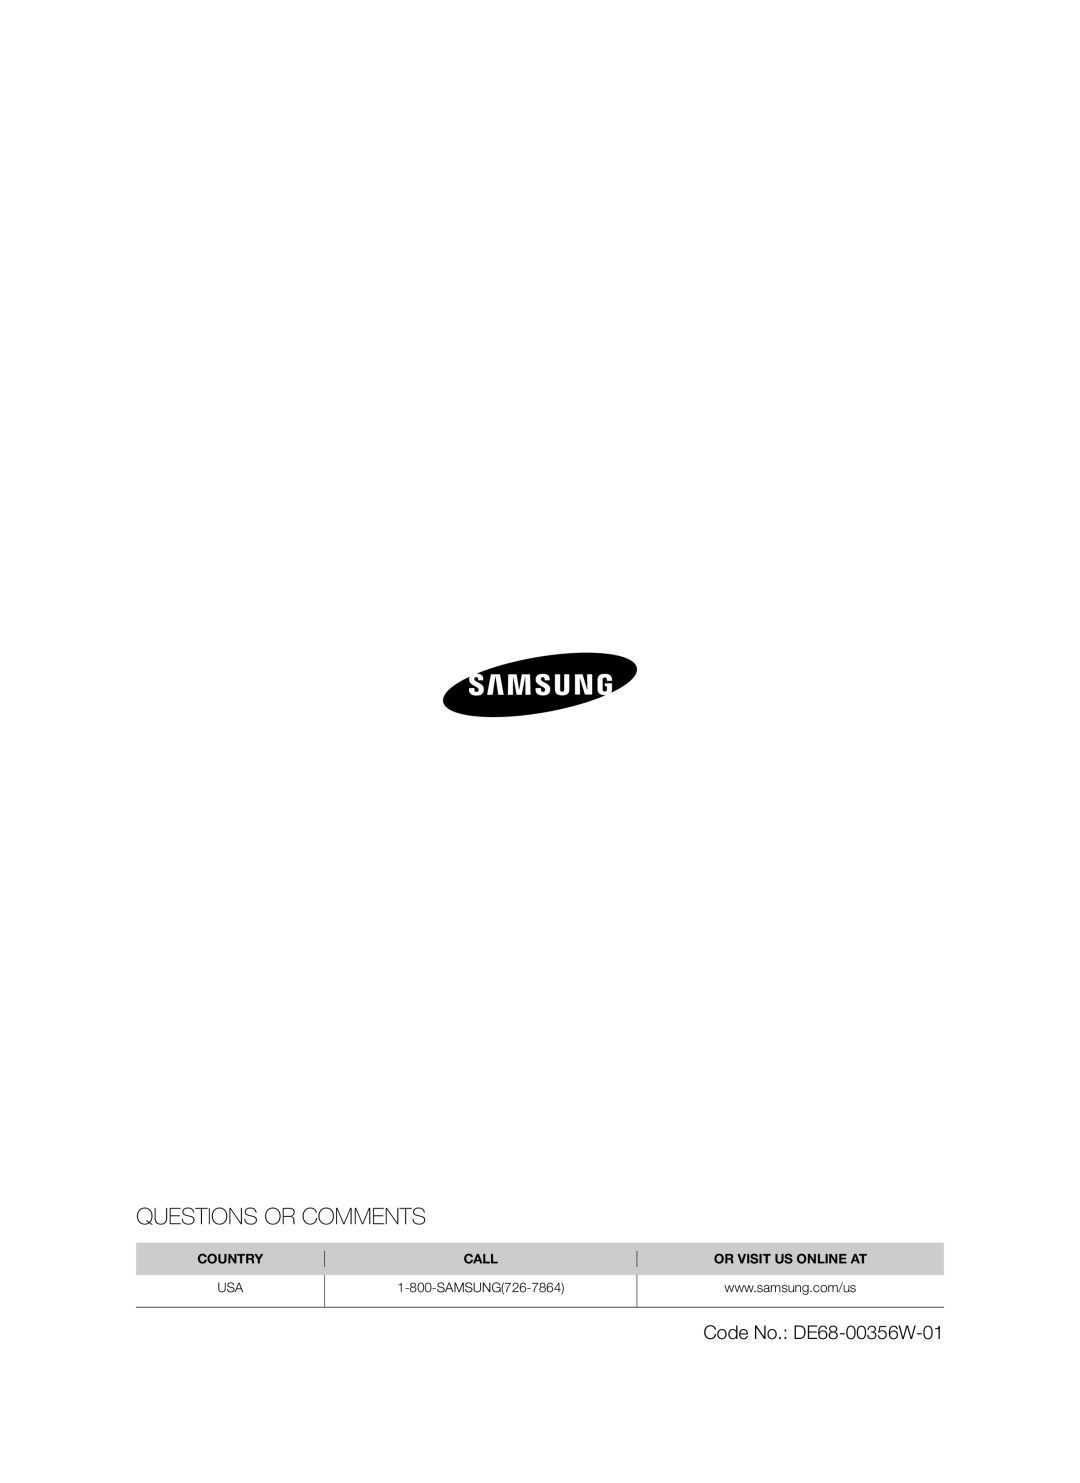 Samsung SMH7185 Questions Or Comments, Code No. DE68-00356W-01, Country, Call, SAMSUNG726-7864, Or Visit Us Online At 